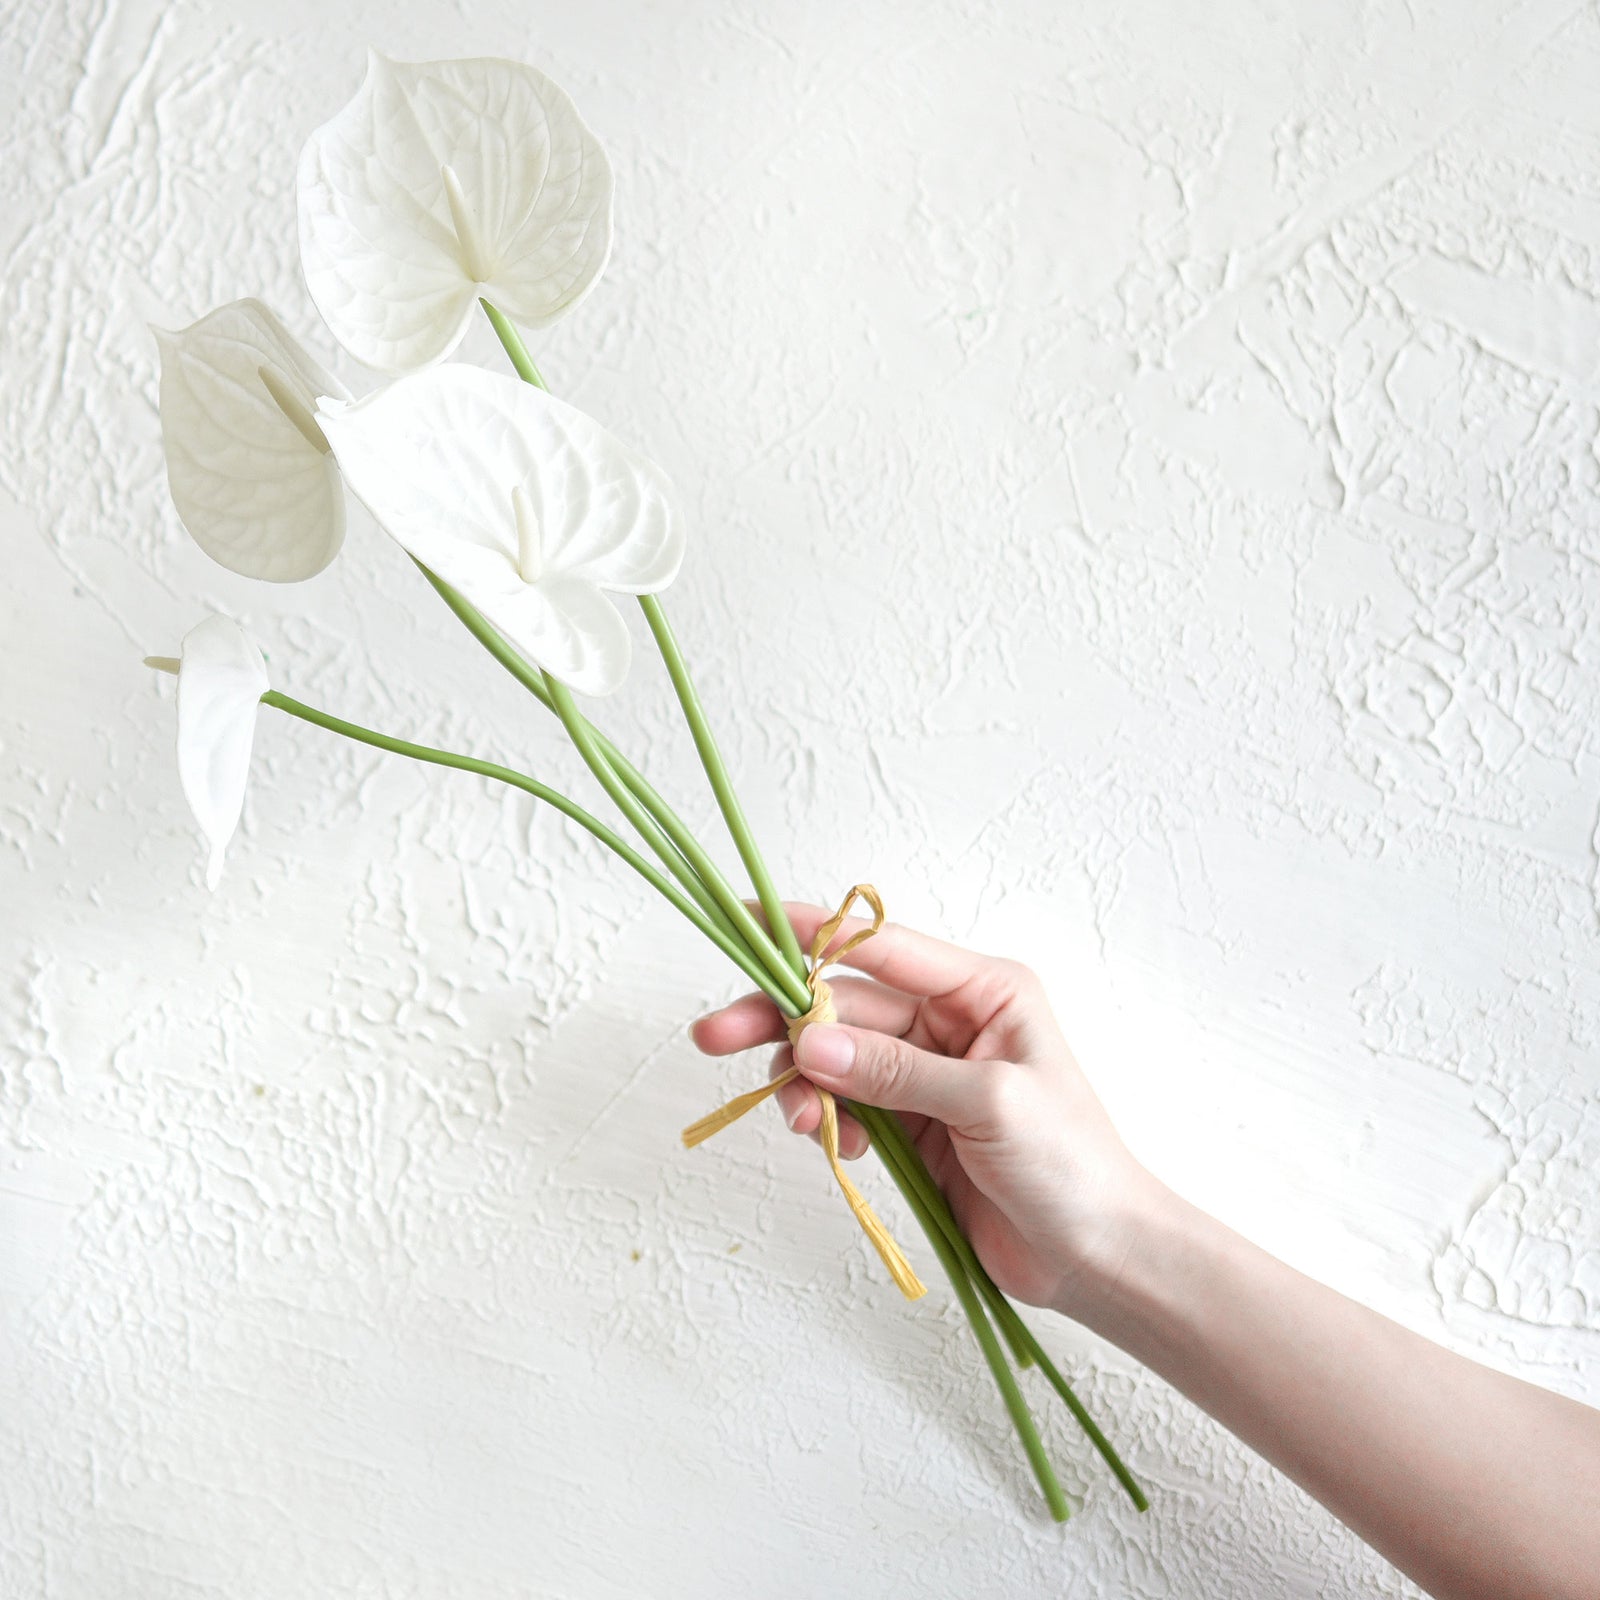 Anthurium Flower 'Seashell White' Real Touch Artificial Flowers, 16.5” 4 Stems FiveSeasonStuff Floral